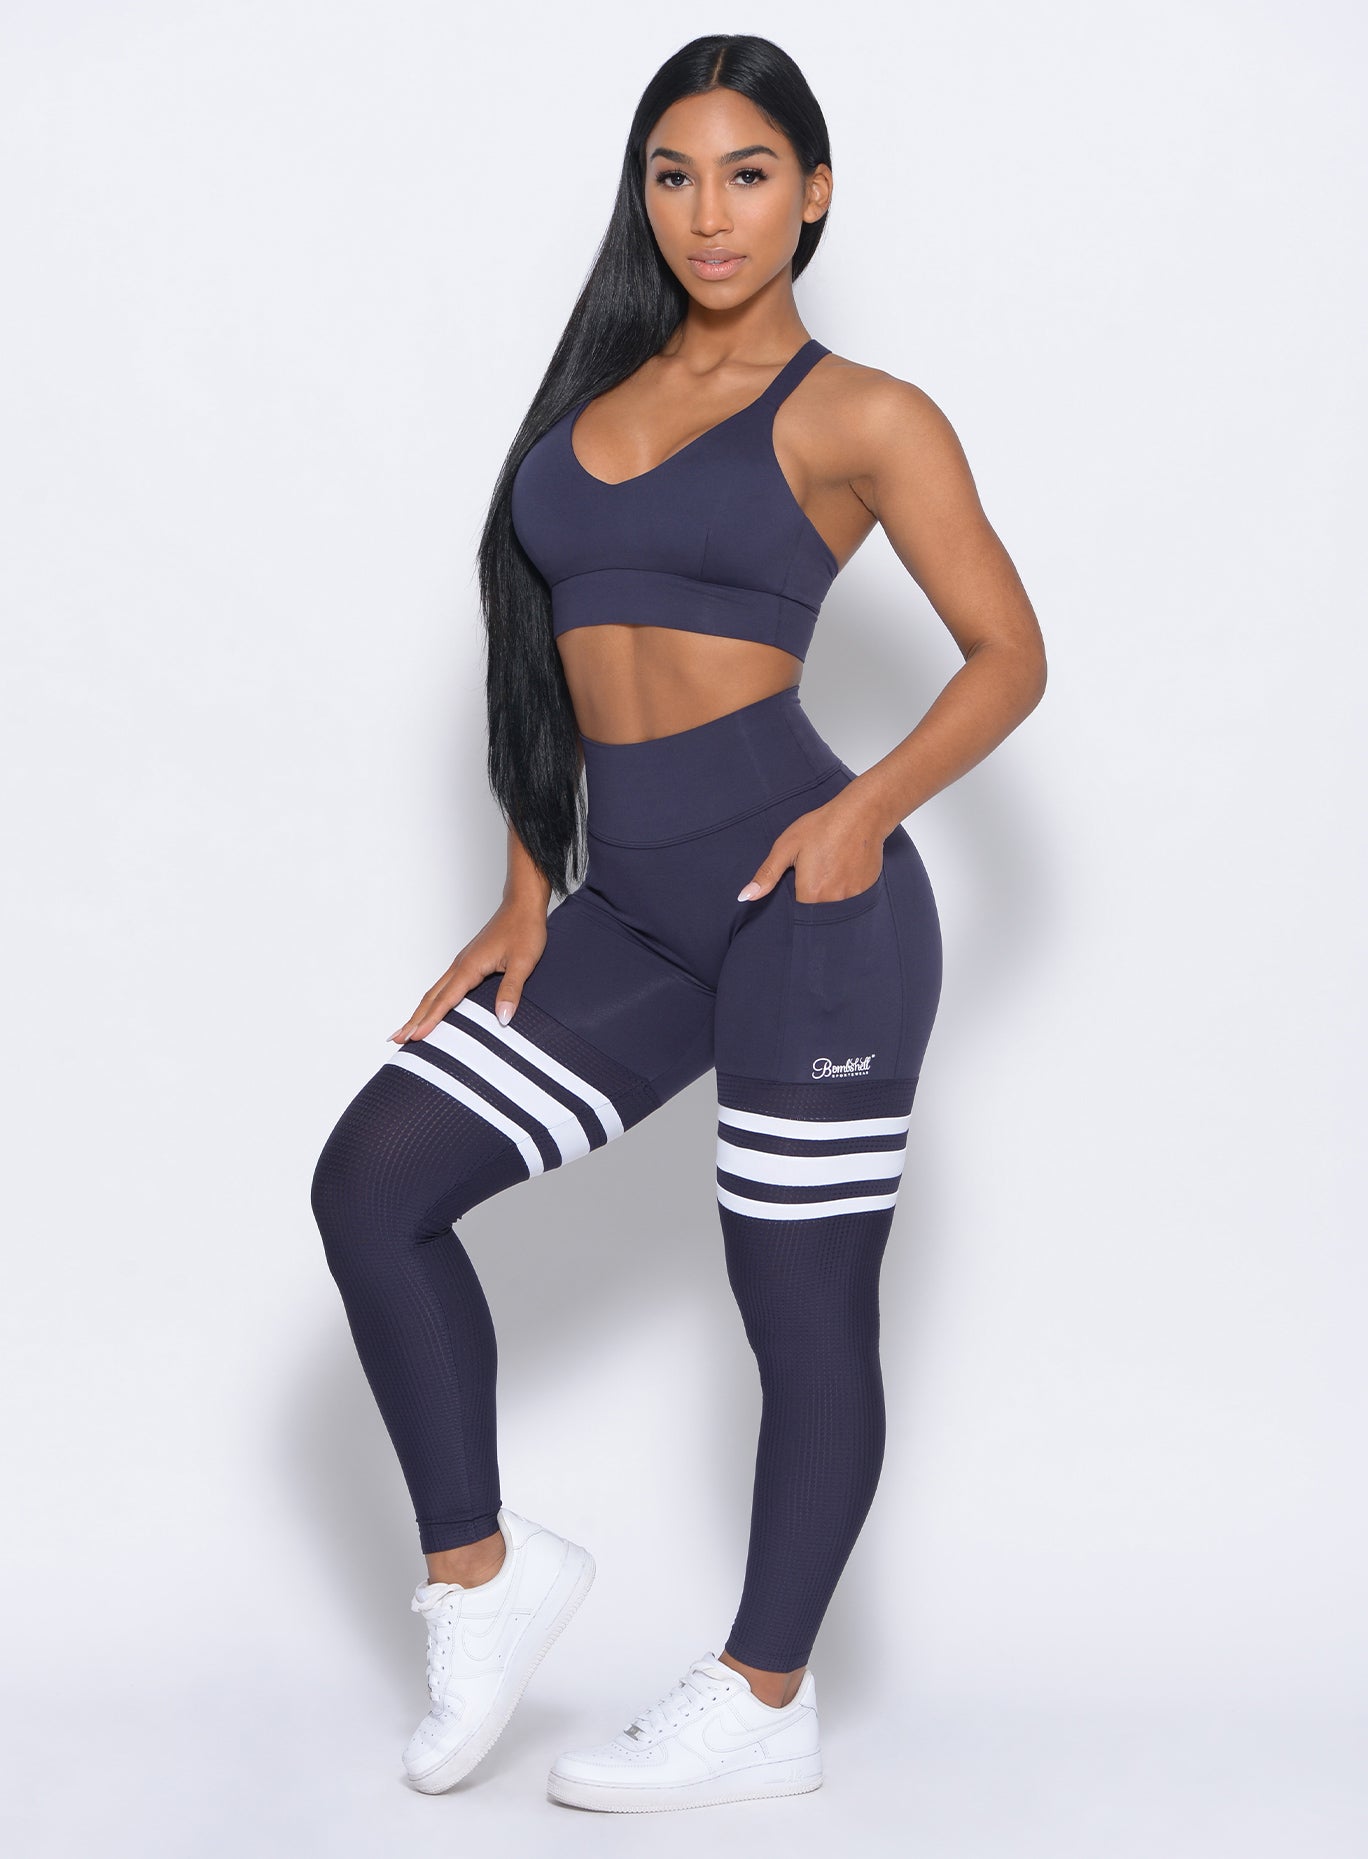 Left side view of the model angled left wearing our synergy sports bra in twilight blue color and a matching high waist leggings